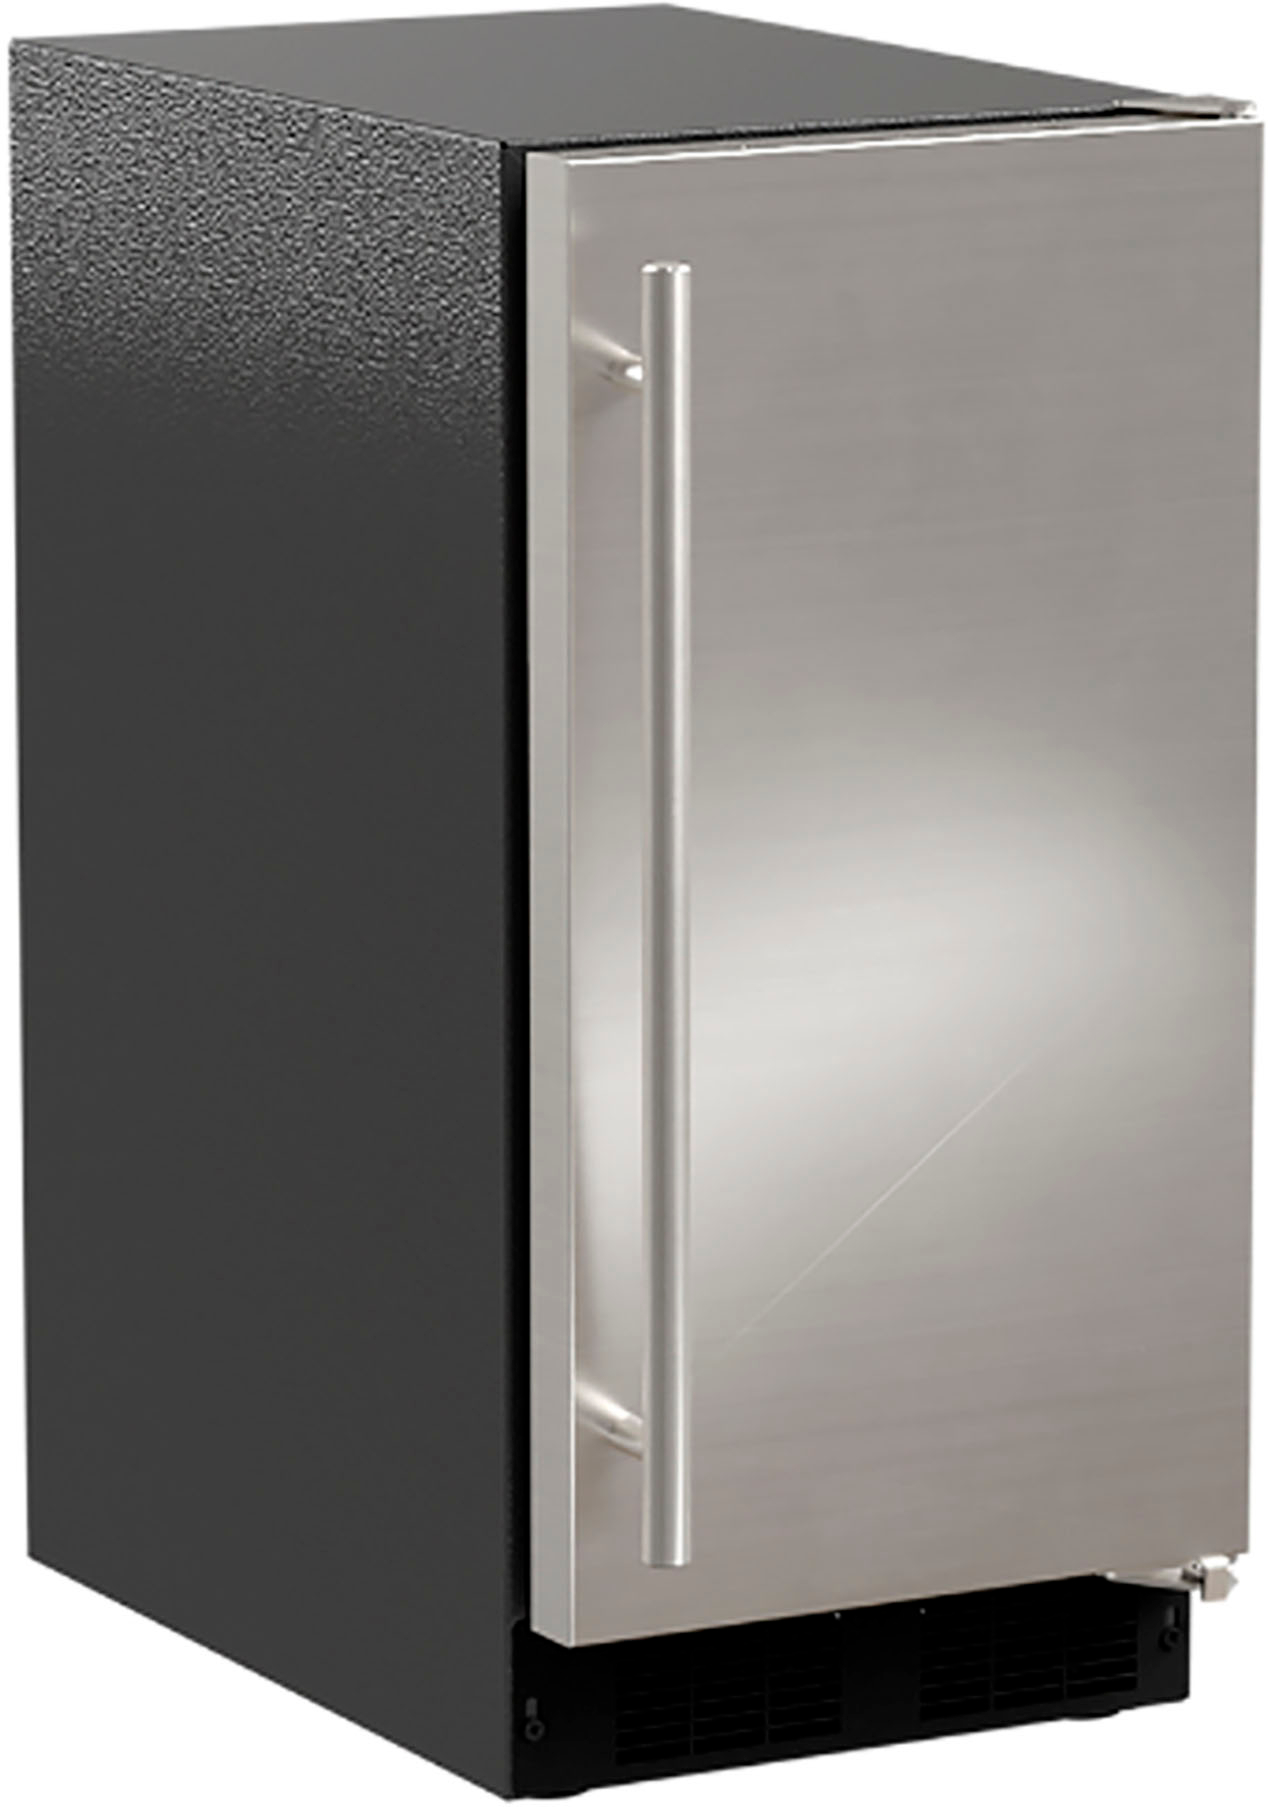 Angle View: U-Line - 15" 55-lb Freestanding Icemaker - Stainless Steel